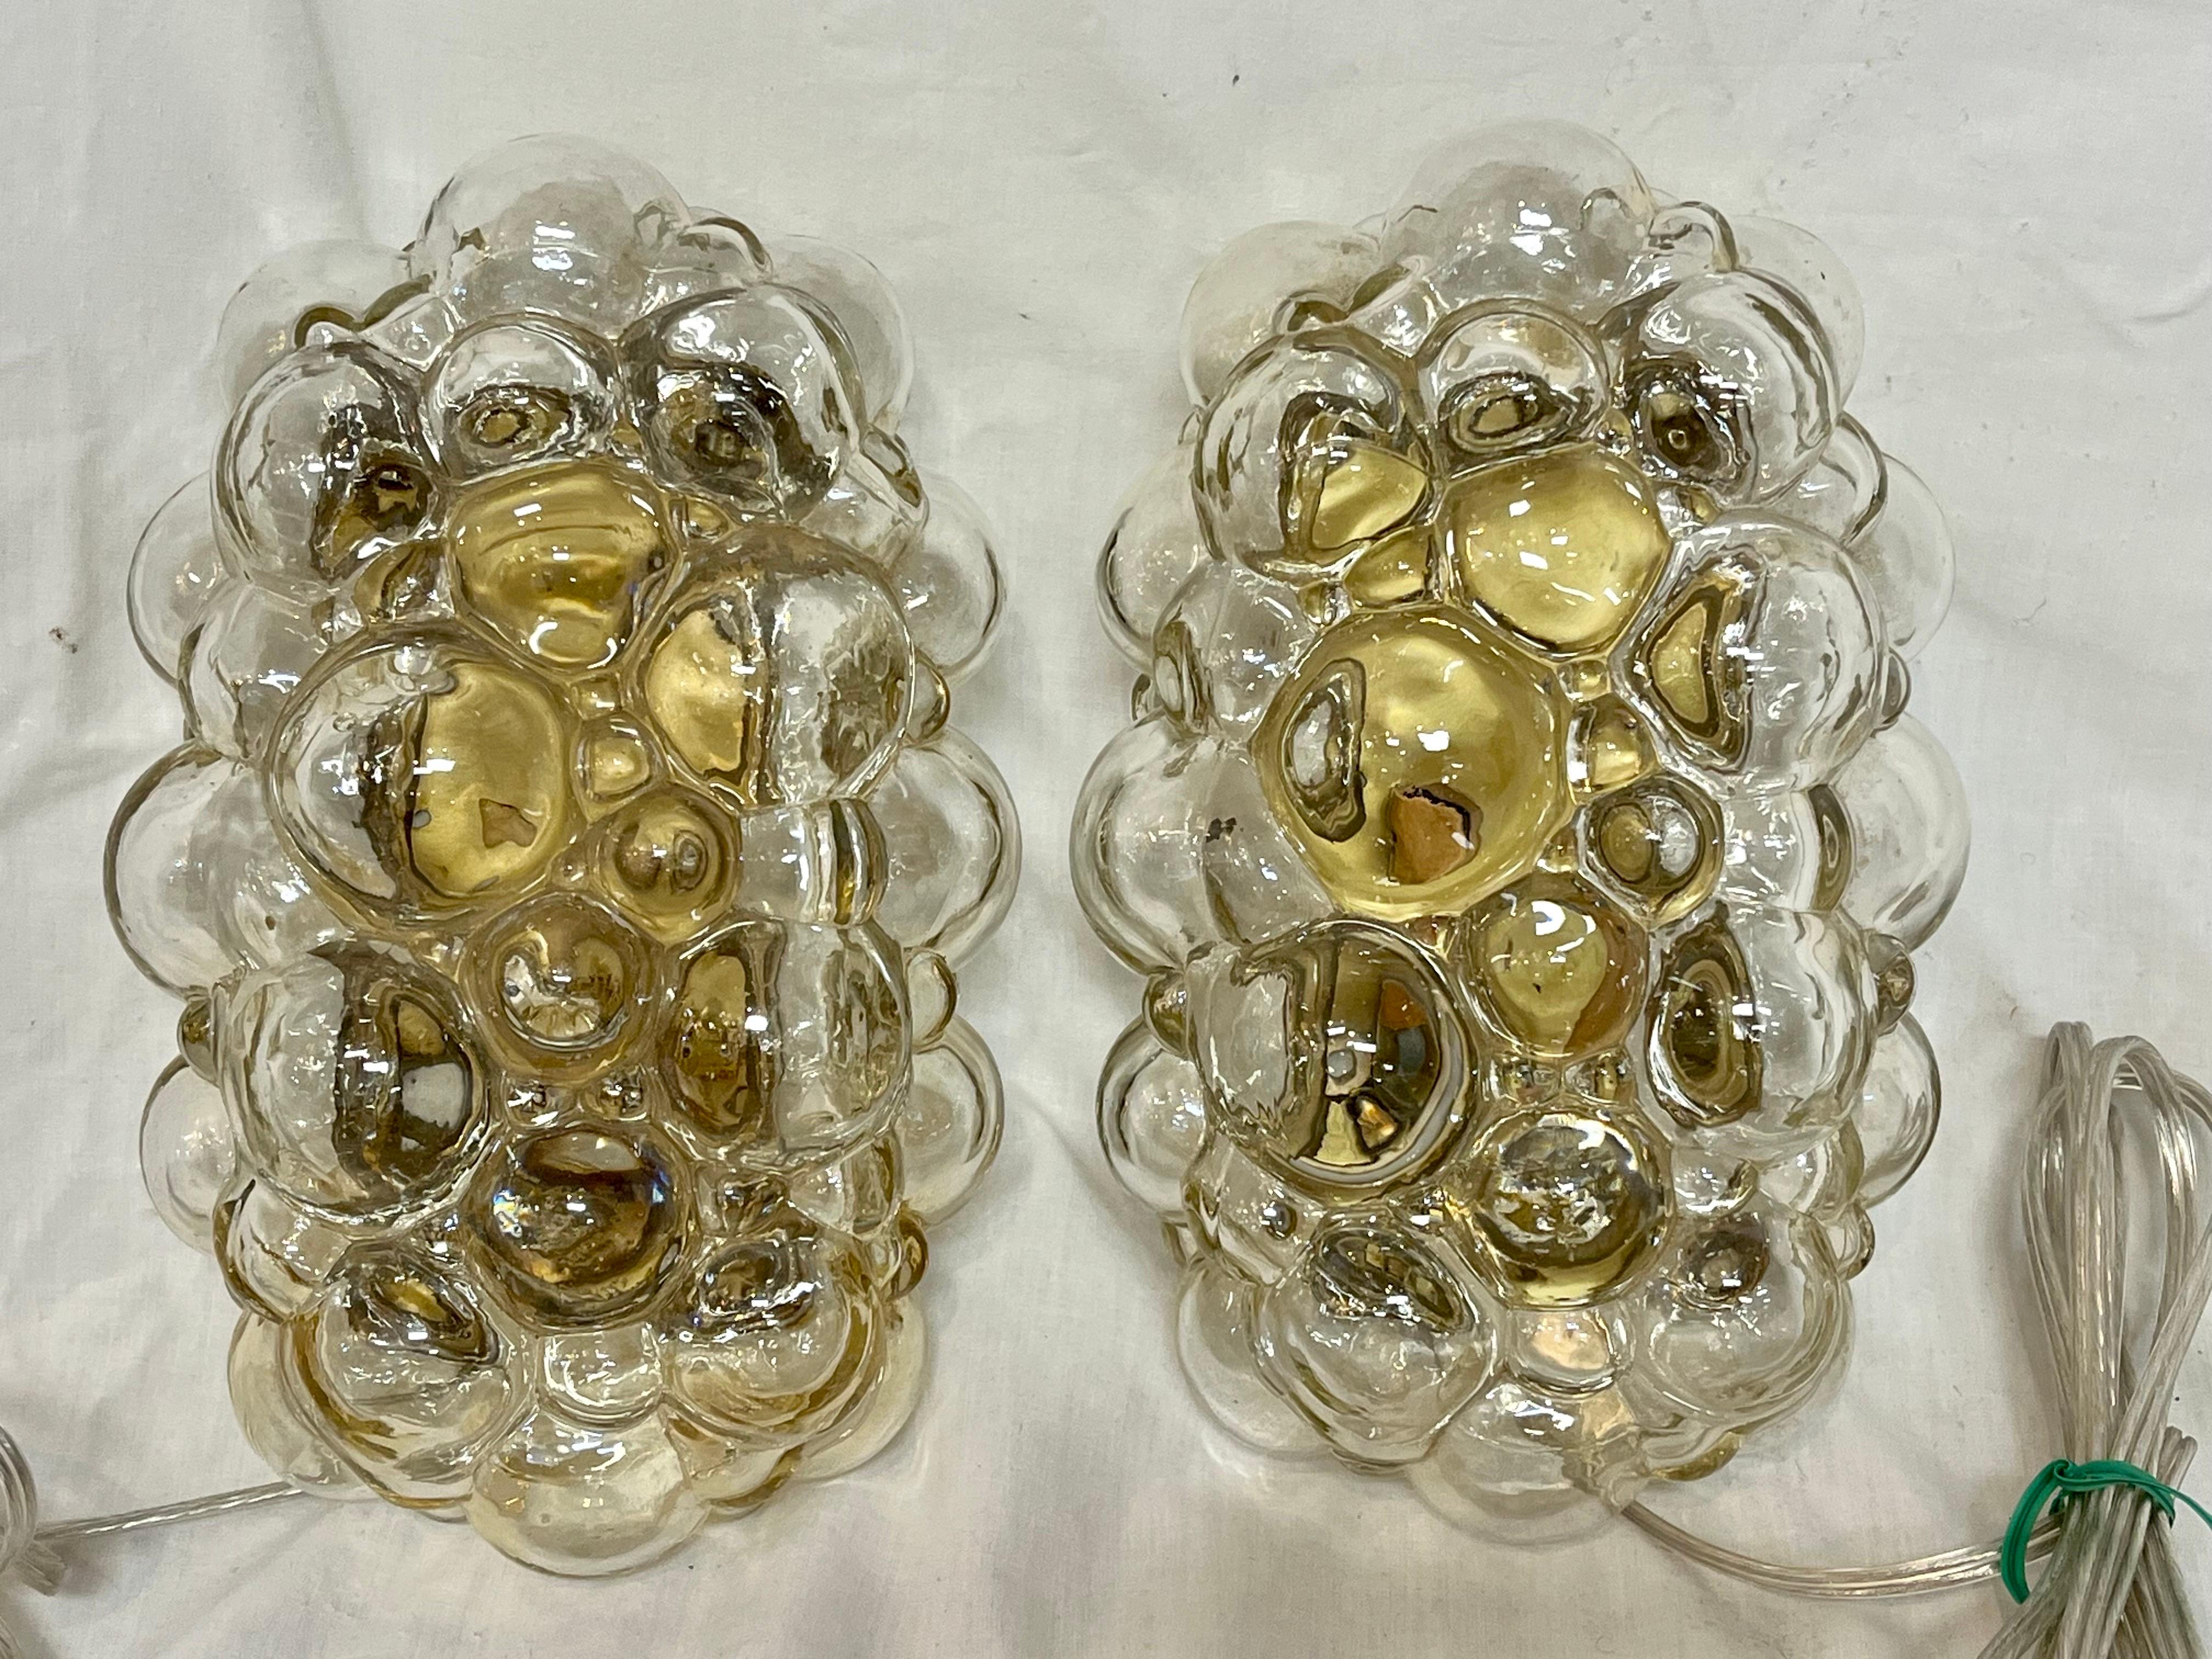 A truly magnificent pair of Helena Tynell for Glashutte Limburg wall sconce lights in a champagne / amber color. The bubble glass is clear with the champagne / amber hue. On the original brass mounting boxes with the original screws, this pair has